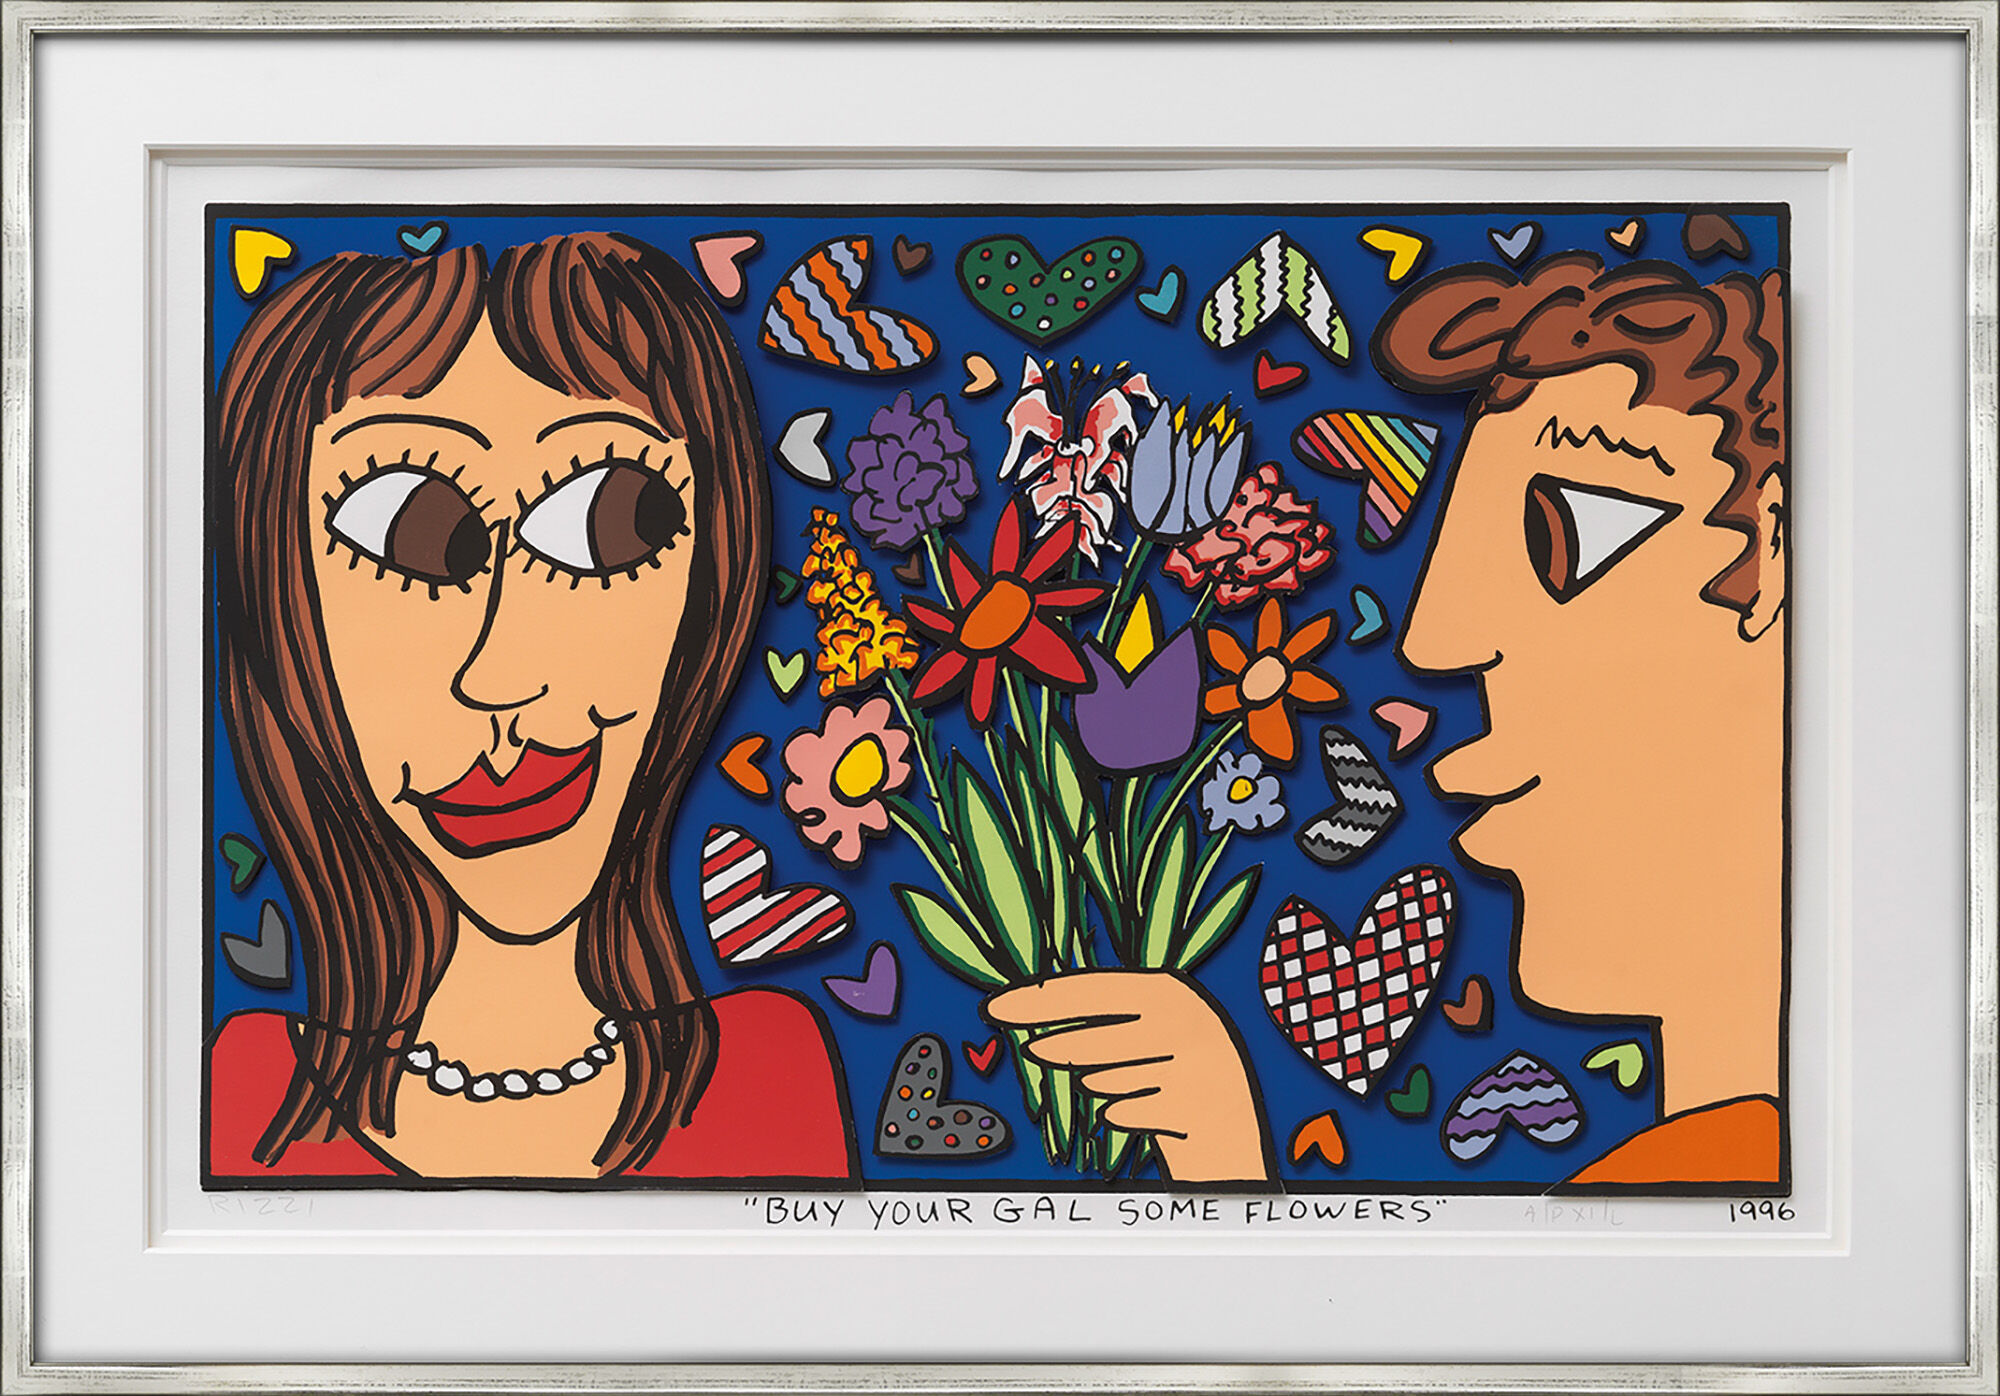 Picture "Buy your Gal some Flowers" (1996) by James Rizzi